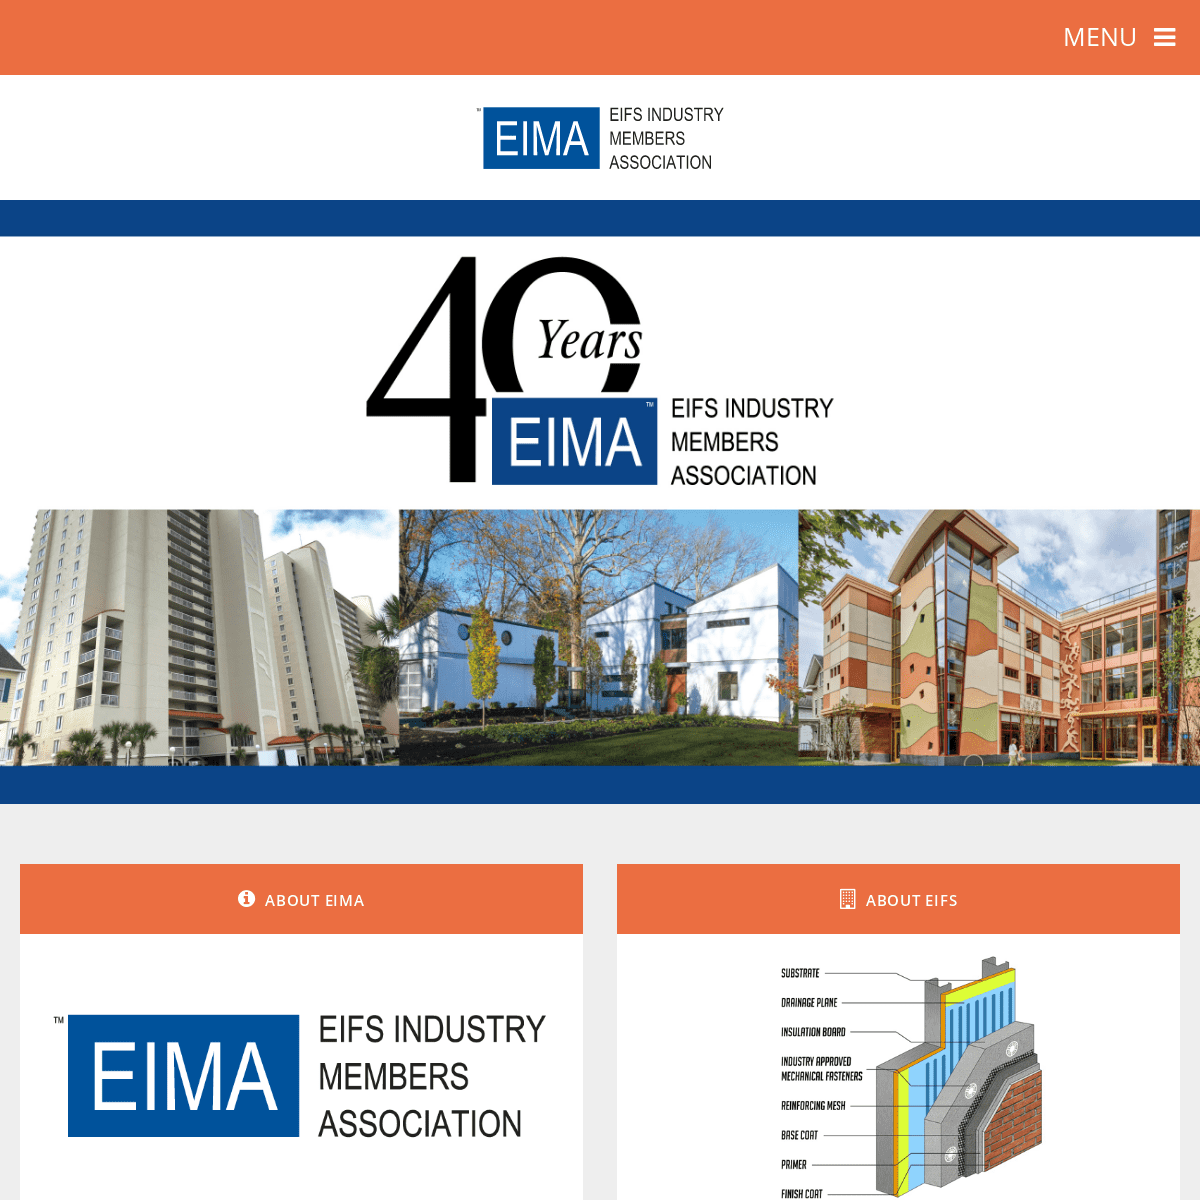 A complete backup of https://eima.com